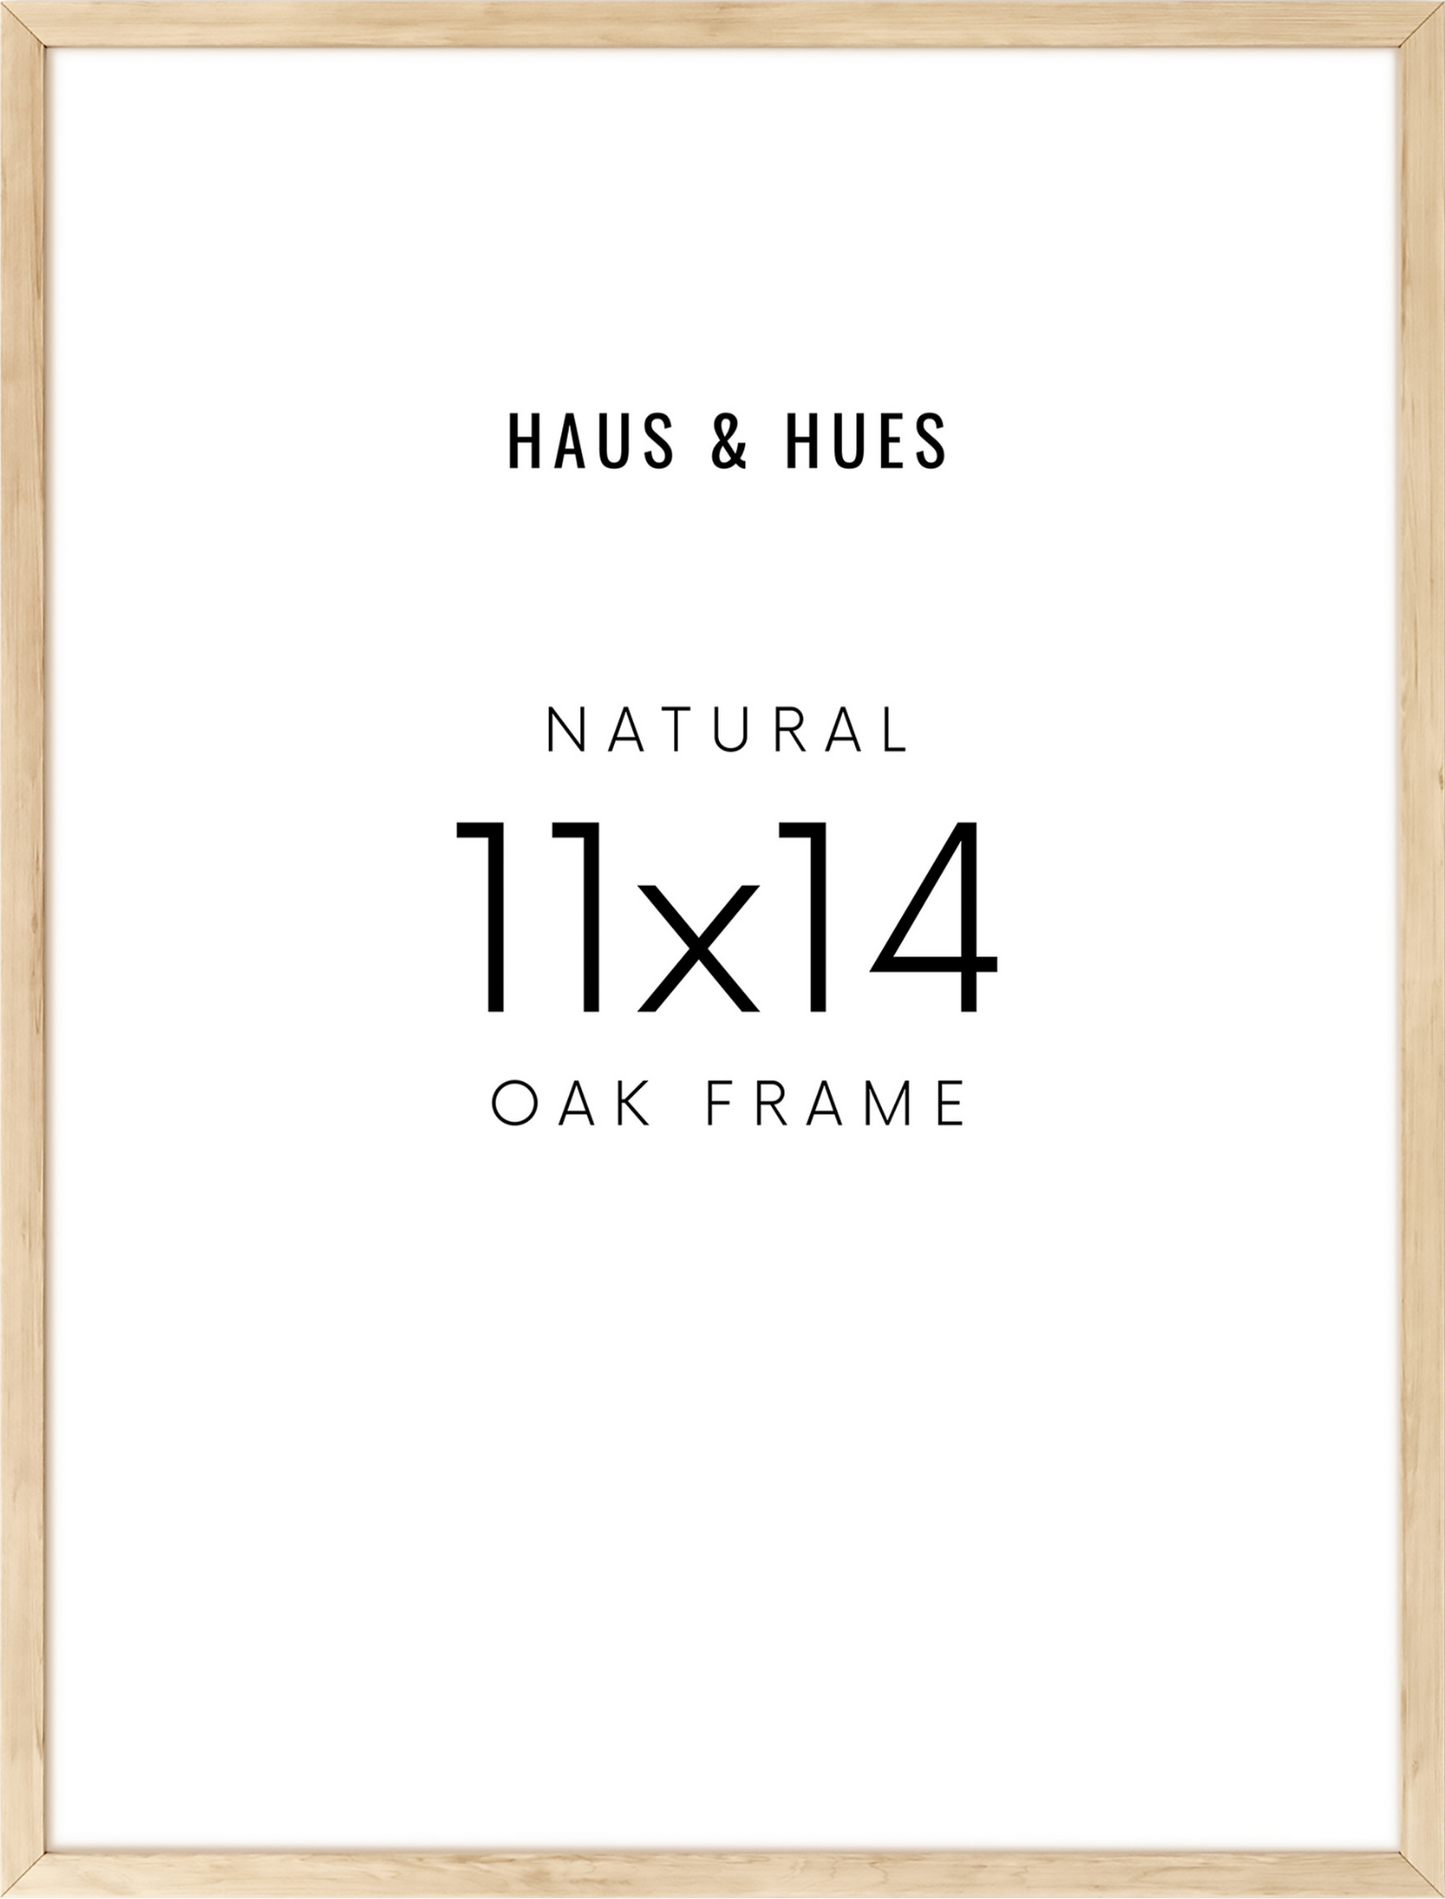 Natural Oak Frame Haus and Hues Color: Beige, Picture Size: 16 x 20